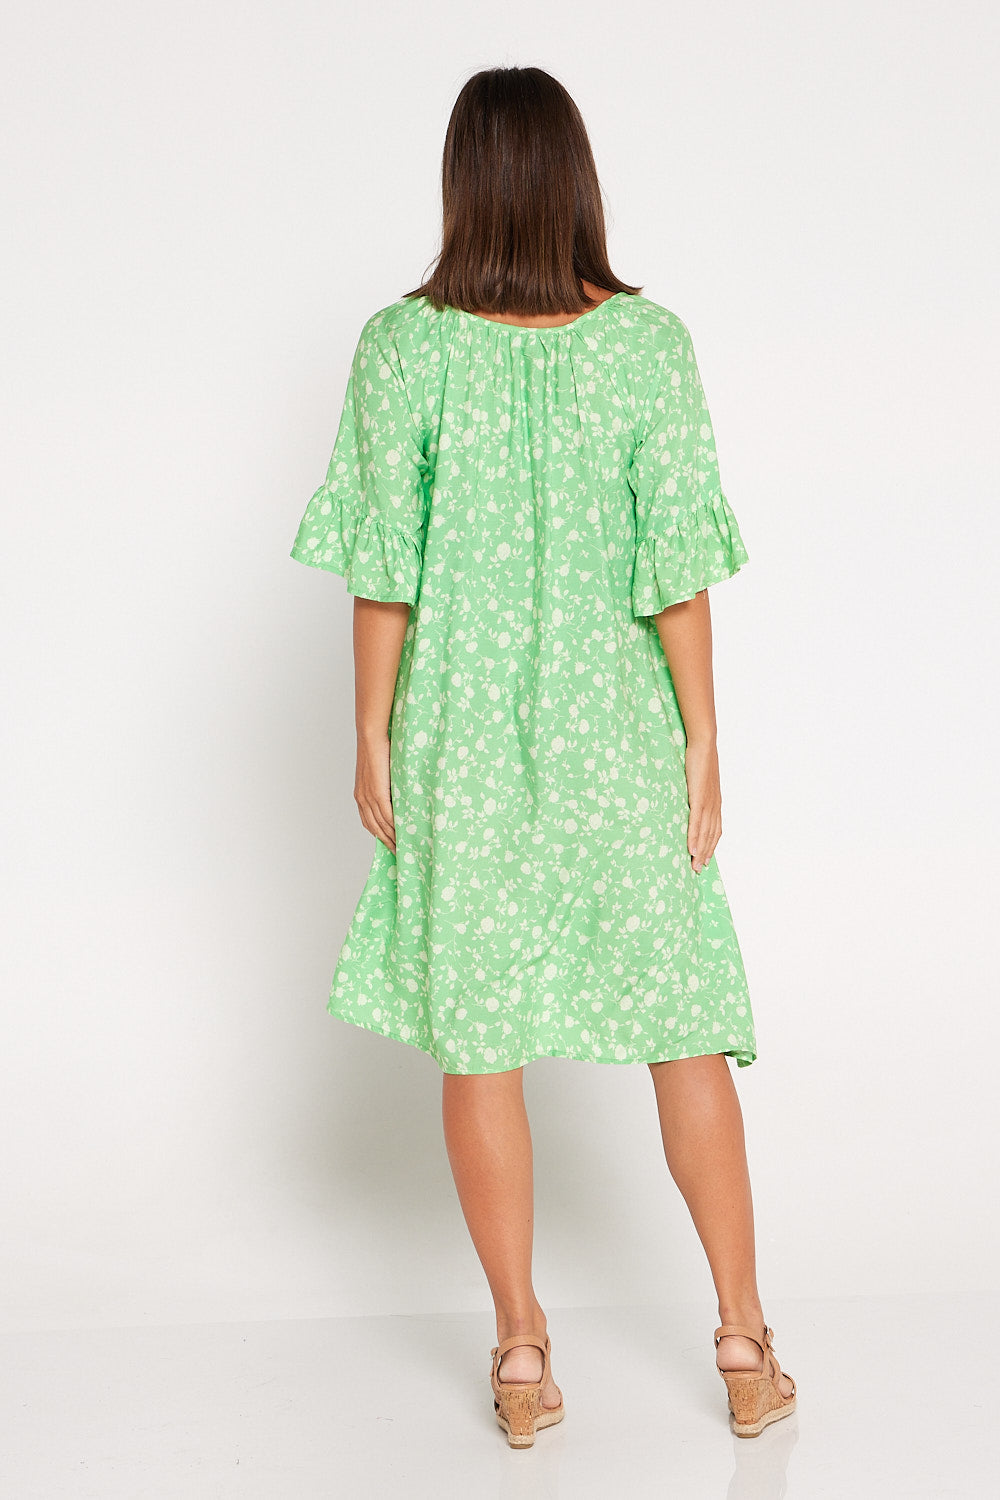 Melodia Dress - Apple Ditsy Floral